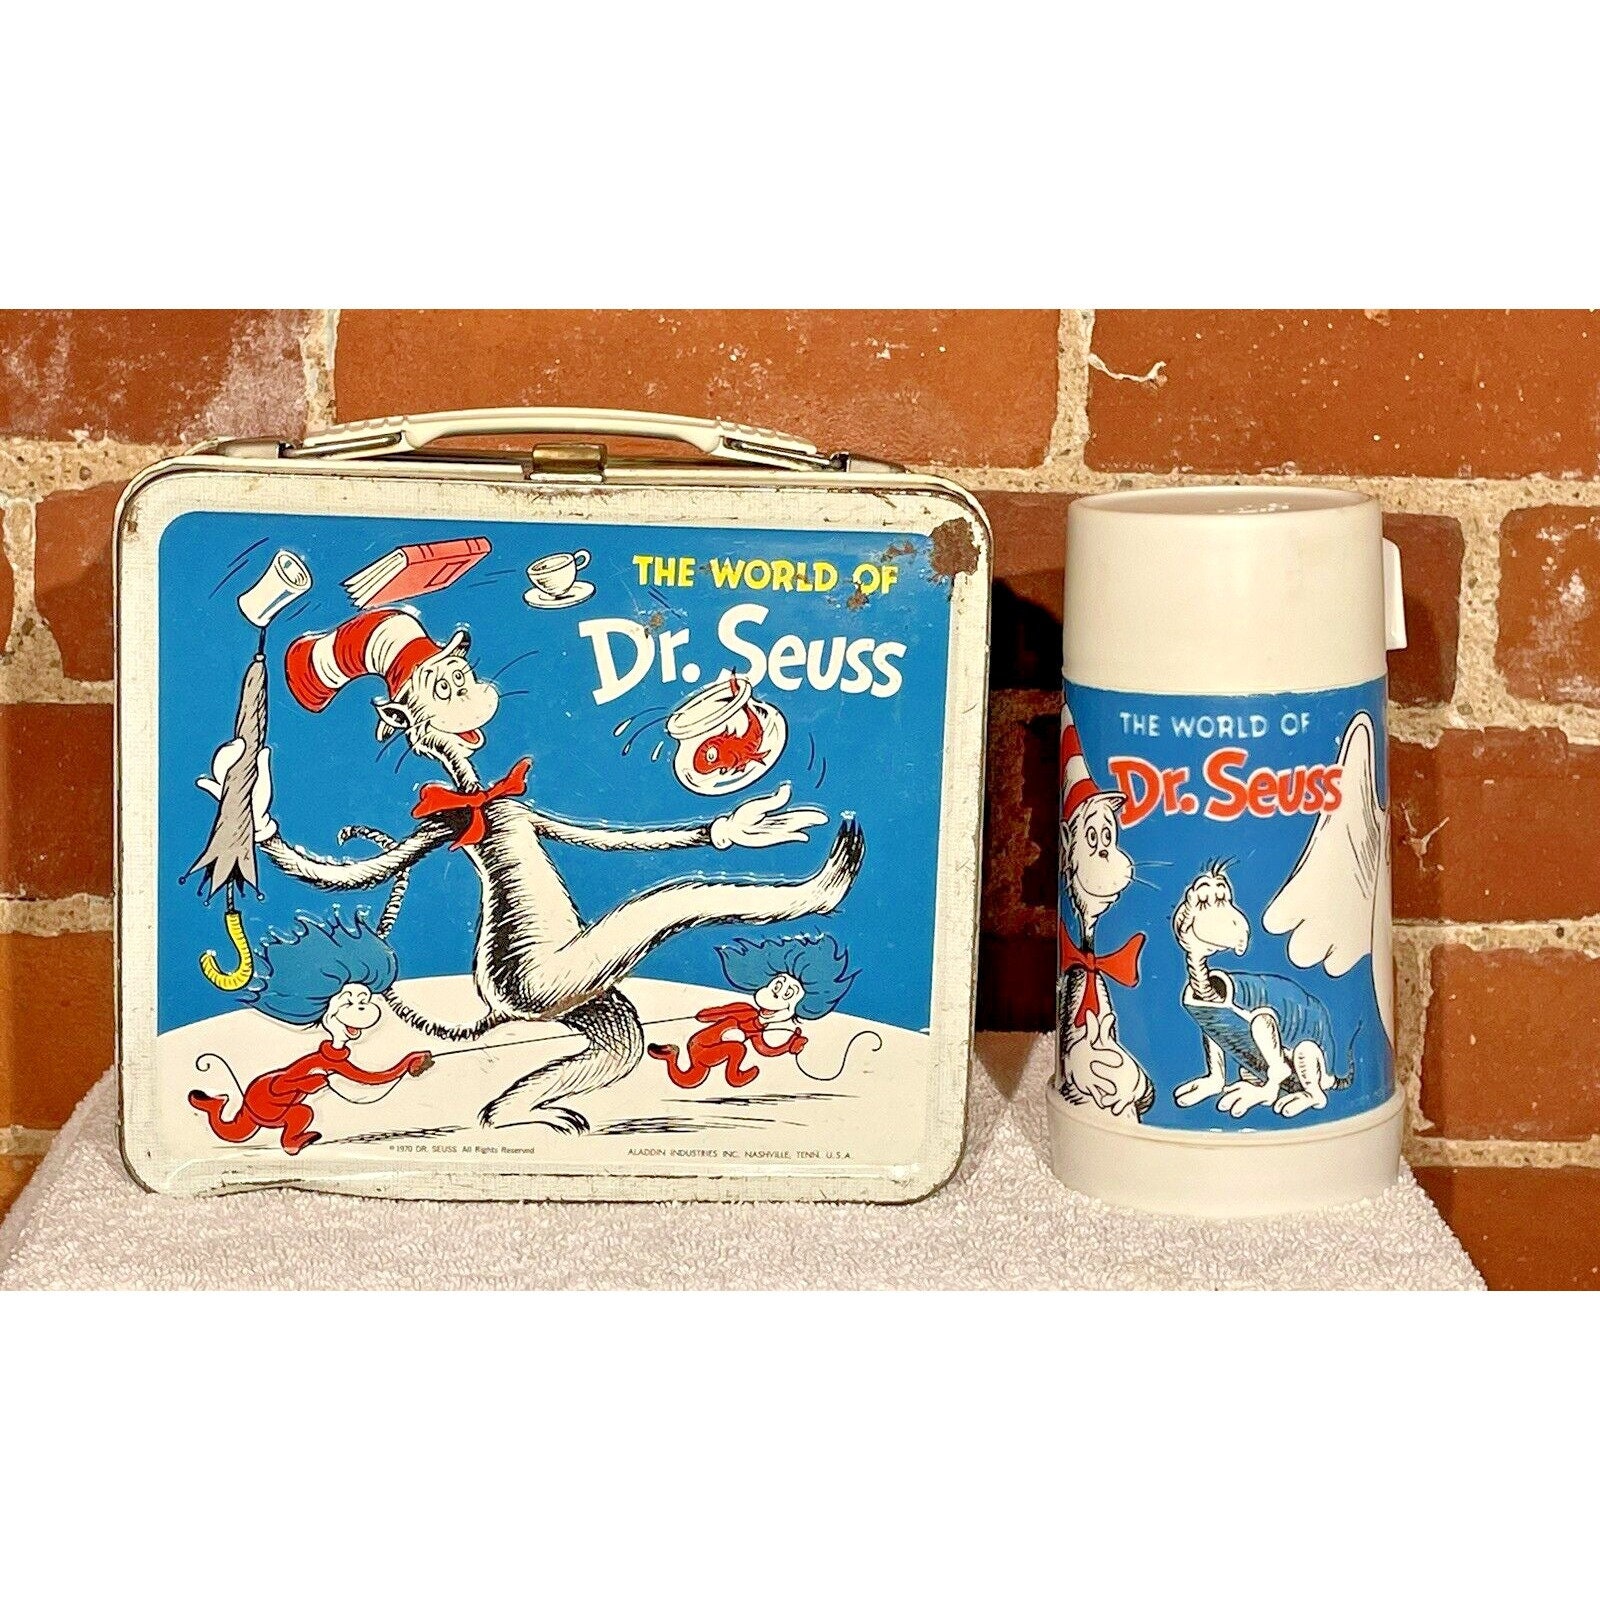 Dr. Seuss Grinch lunch box with thermos 1996